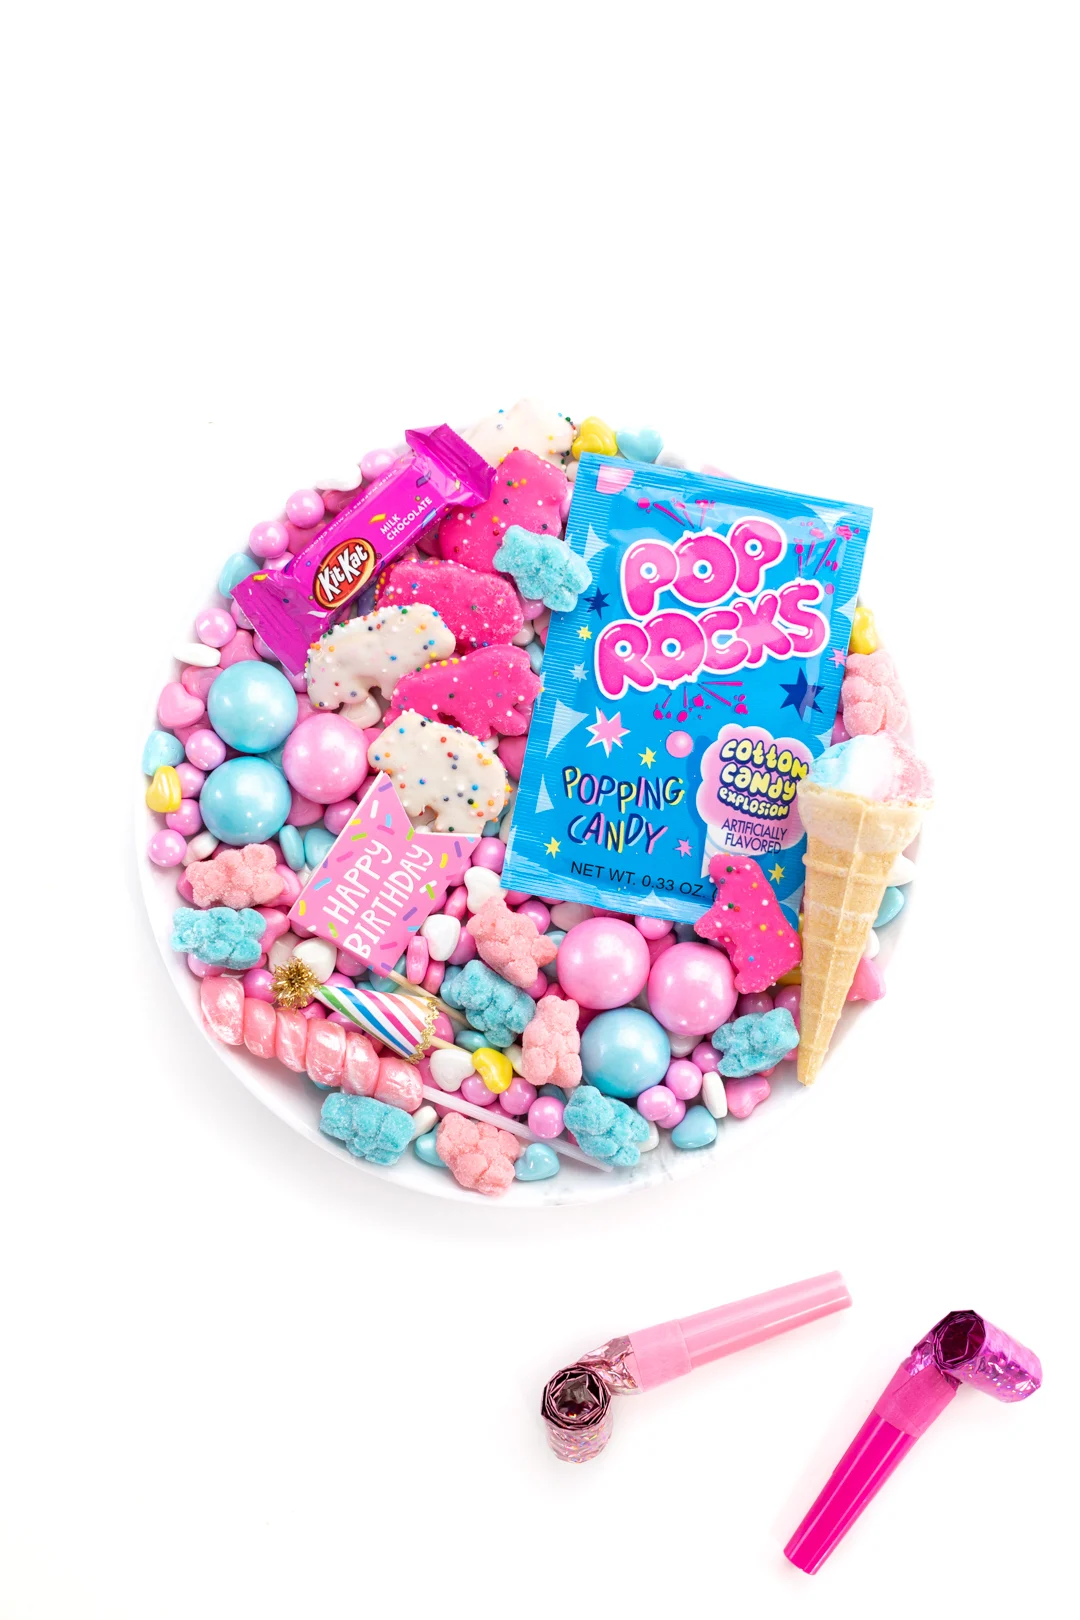 small candy board to celebrate birthdays with joy filled candy picks that are pink and blue.... classic birthday colors